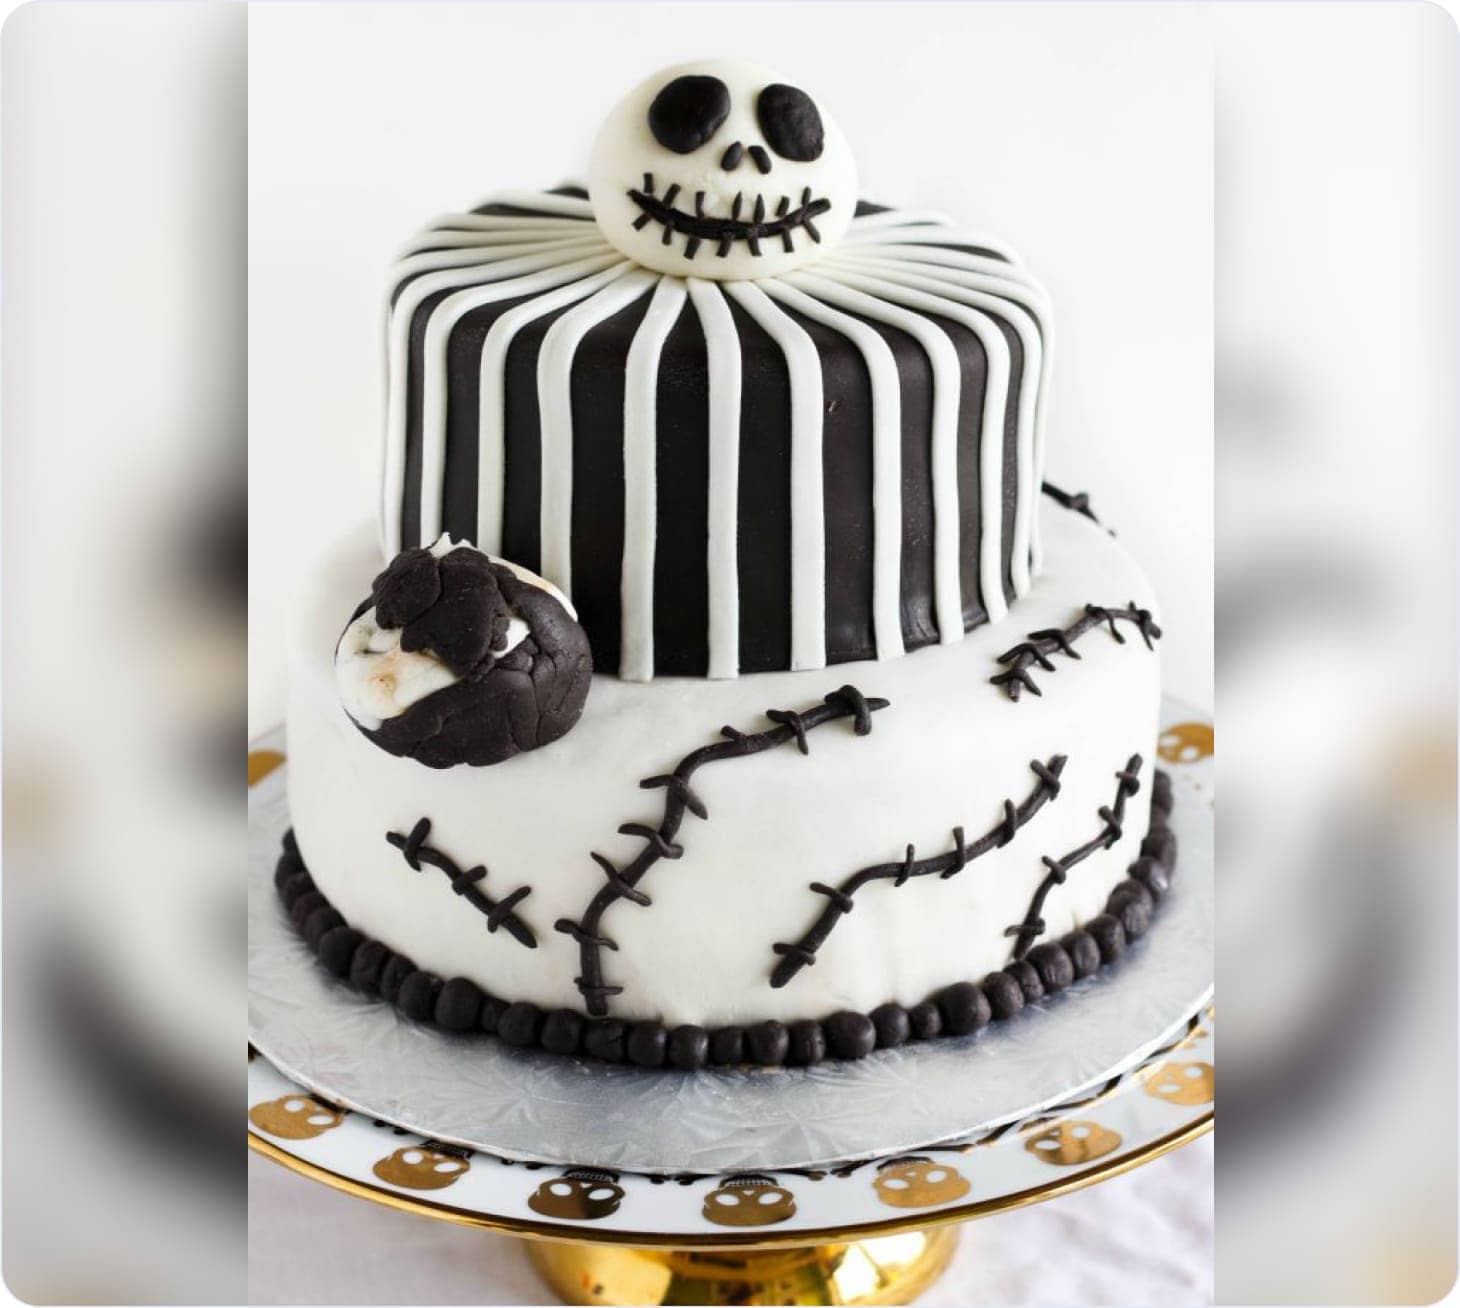 Christmas cake in the style of Jack Skellington